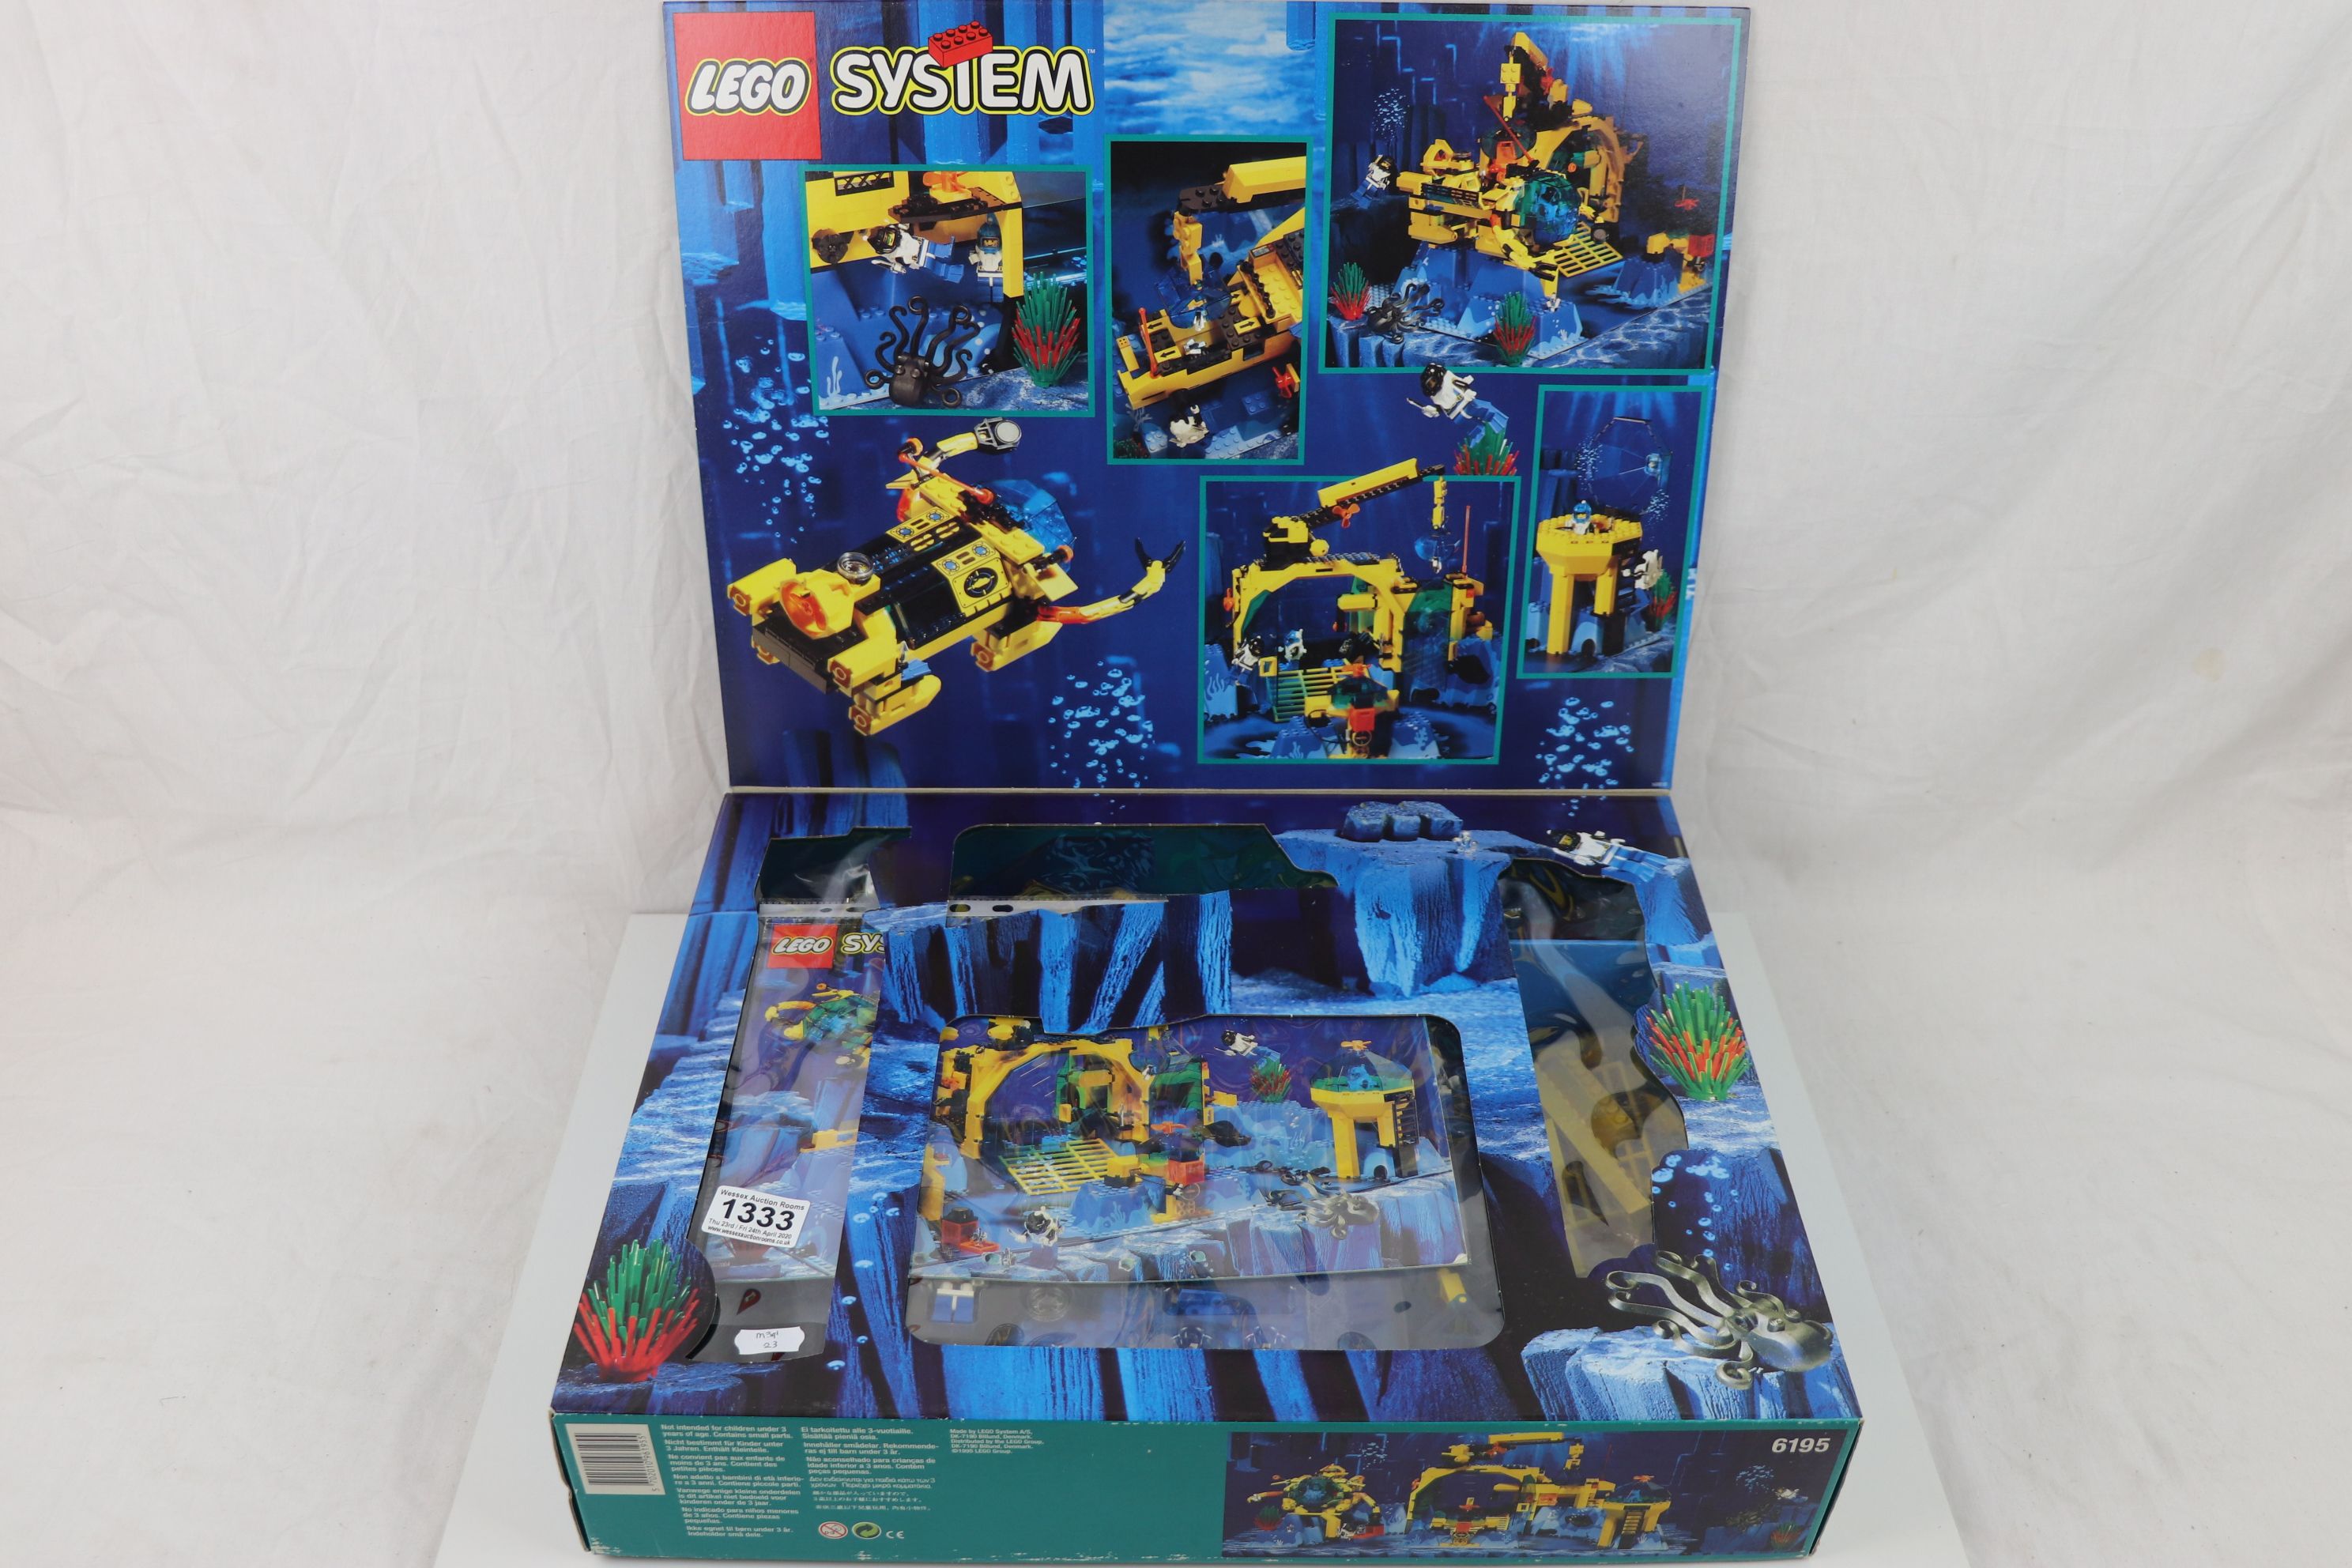 Lego - Boxed Lego System 6195 Aquanauts Neptune Discovery set unchecked but appearing complete - Image 4 of 16